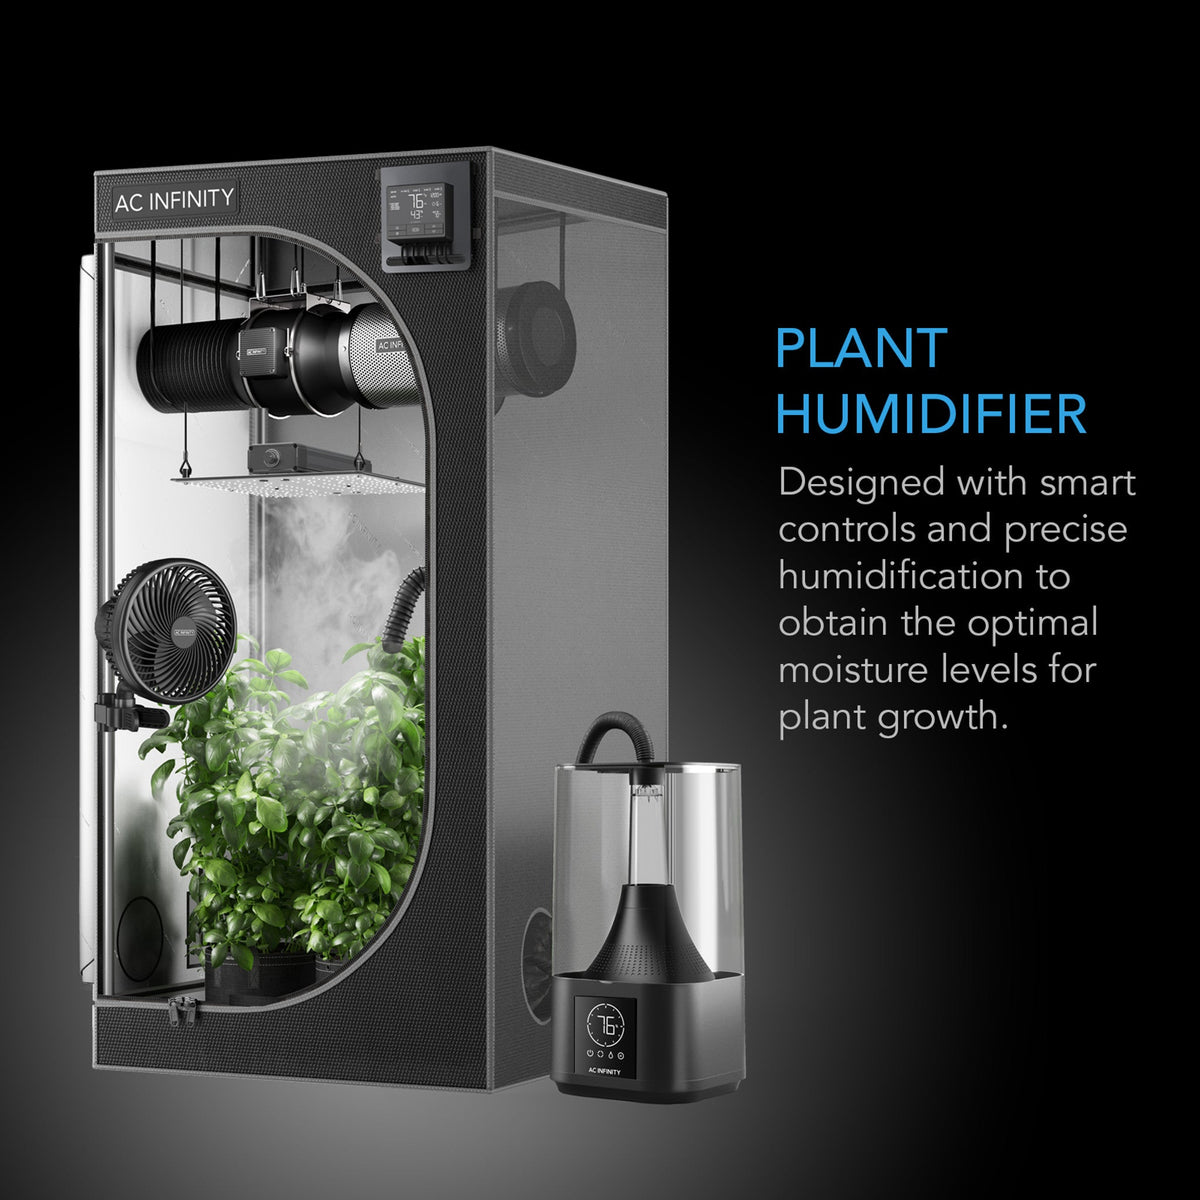 AC Infinity AC Infinity Cloudforge T3, Environmental Plant Humidifier Set-up